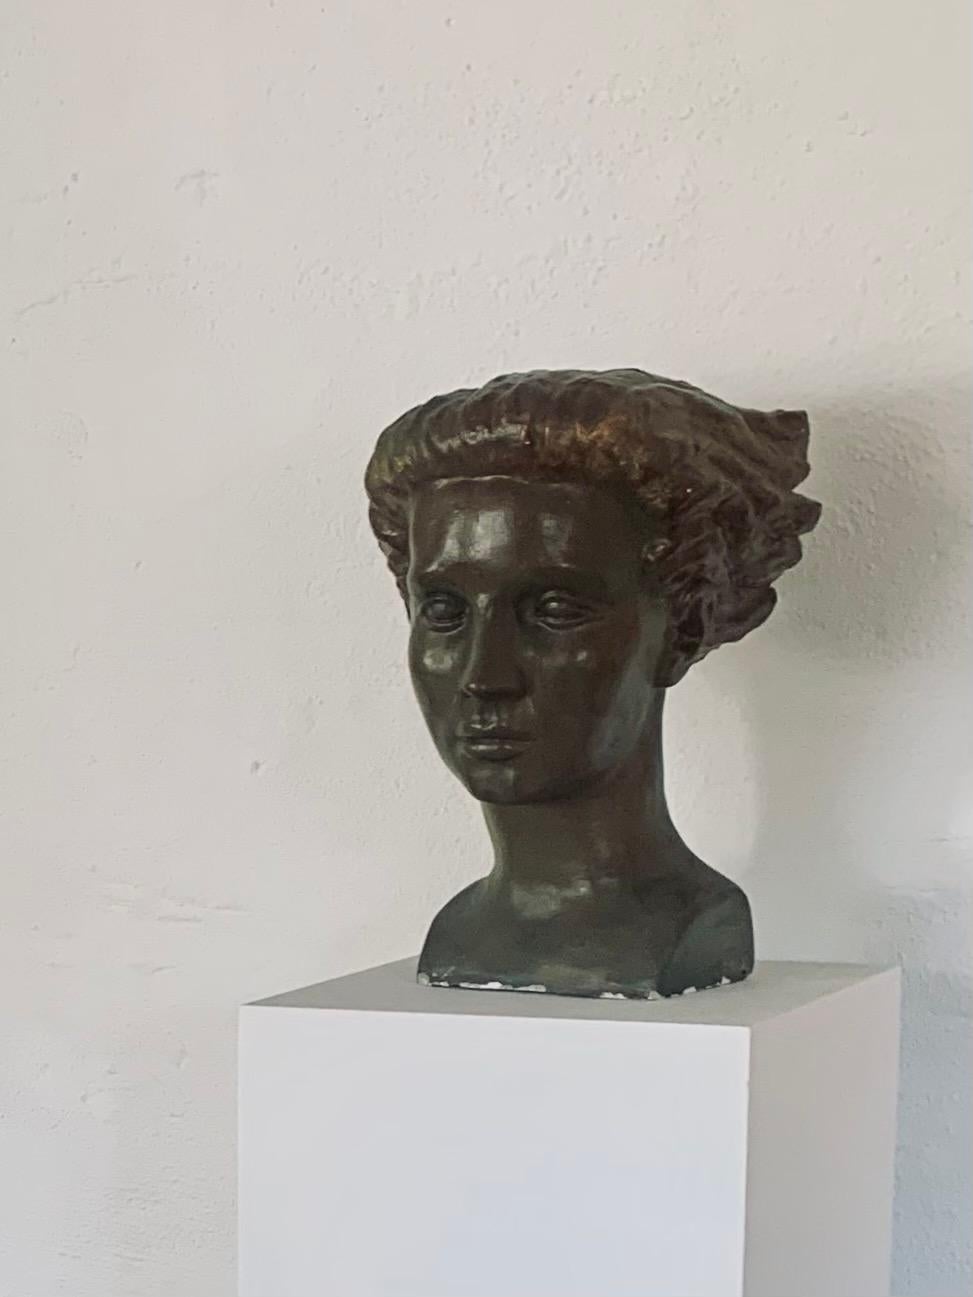 Bronze patinated female plaster bust by the Swedish sculptor Sigge Berggren. Large piece with a strong presence. Some chips and ware adding to the nice patina. 

Sigurd 